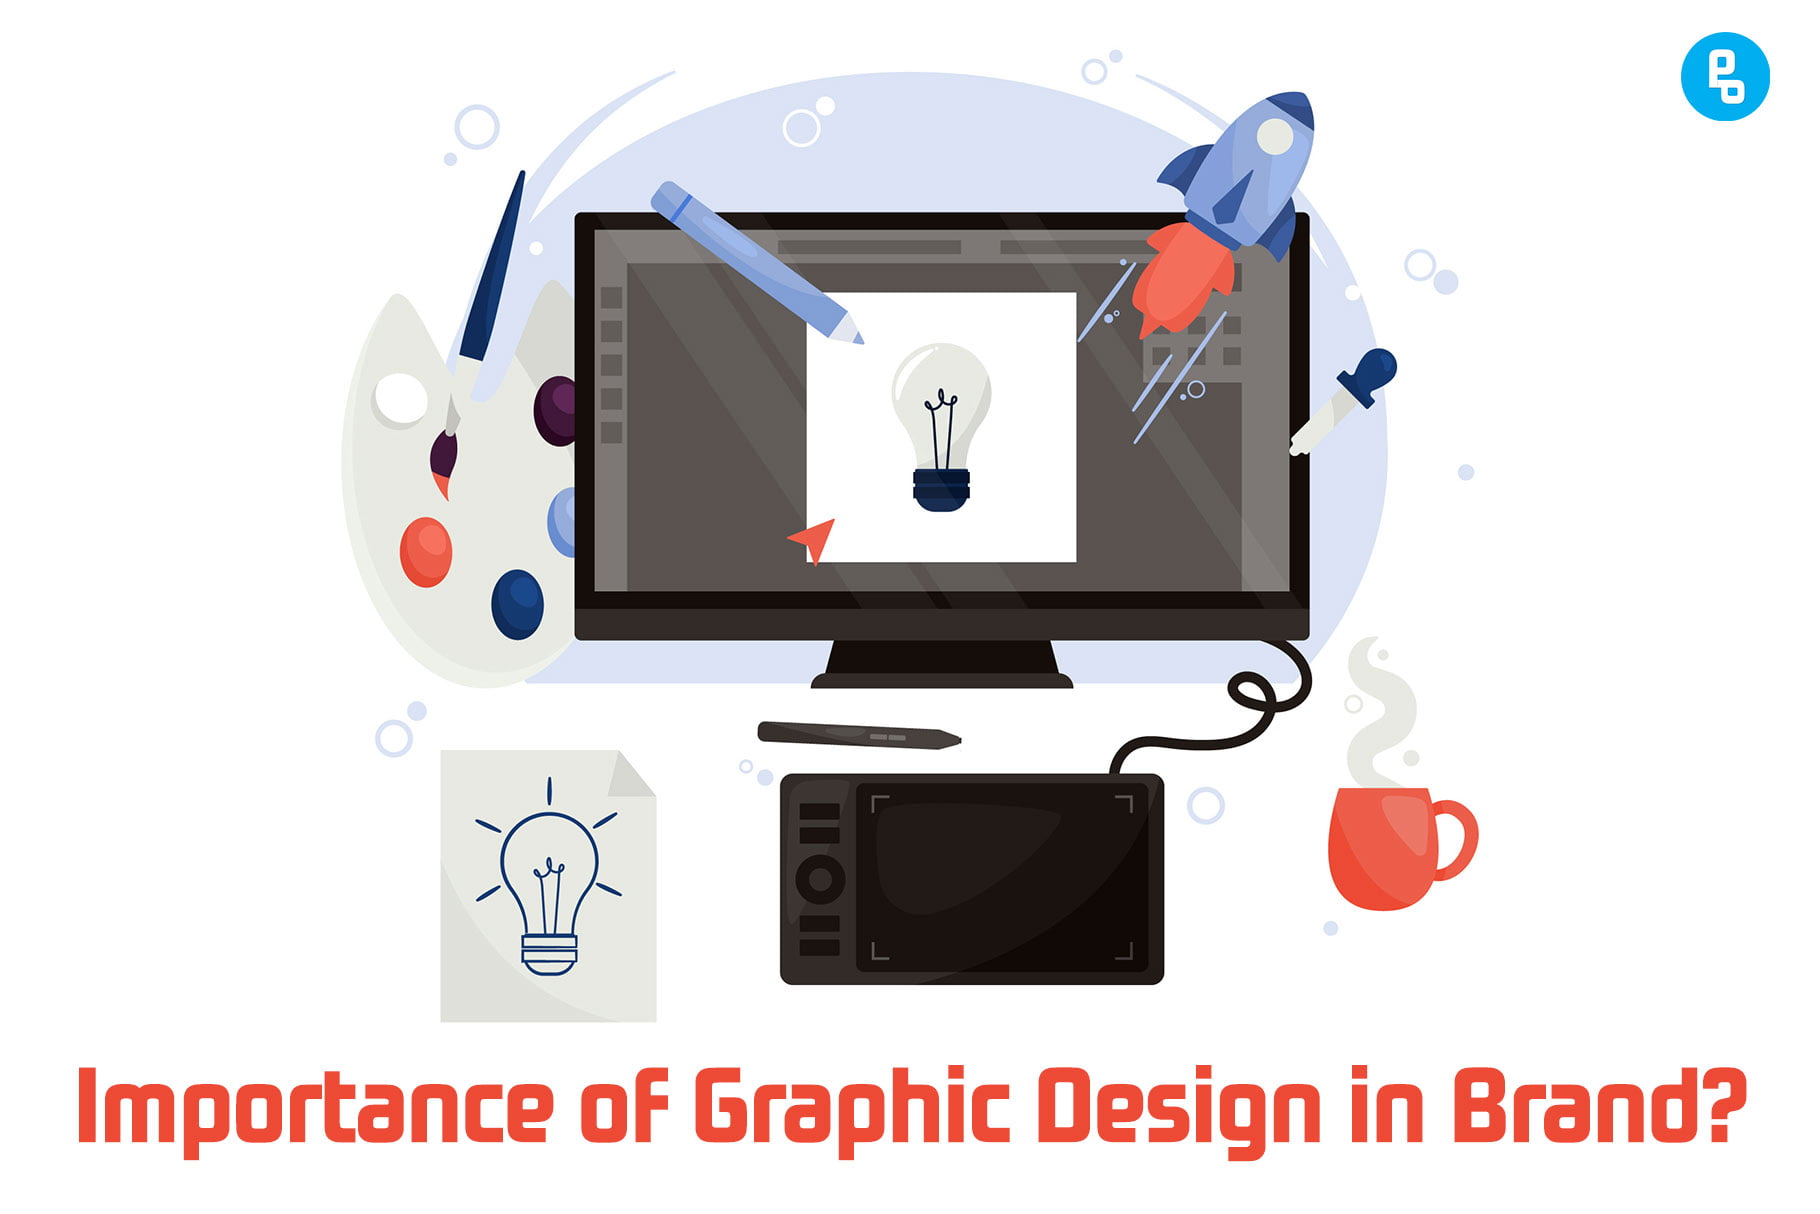 In this article, we'll discuss why graphic design is so important and how it can help you build a strong brand that will help you attract an audience and generate loyalty among them.